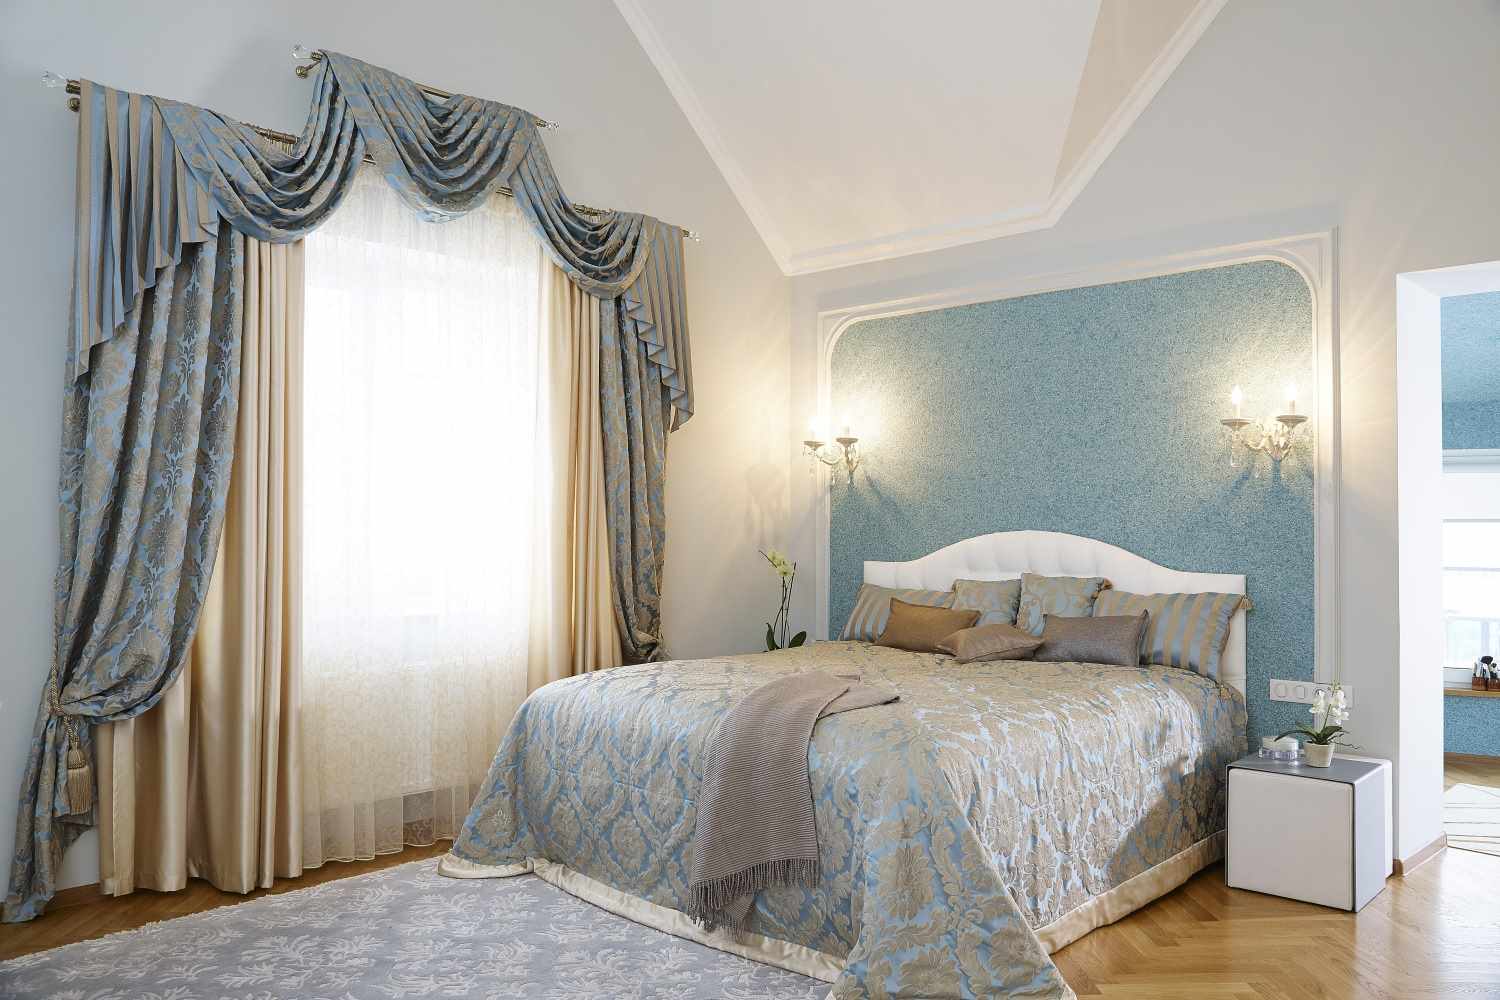 the idea of ​​bright decoration of the style of the walls in the bedroom